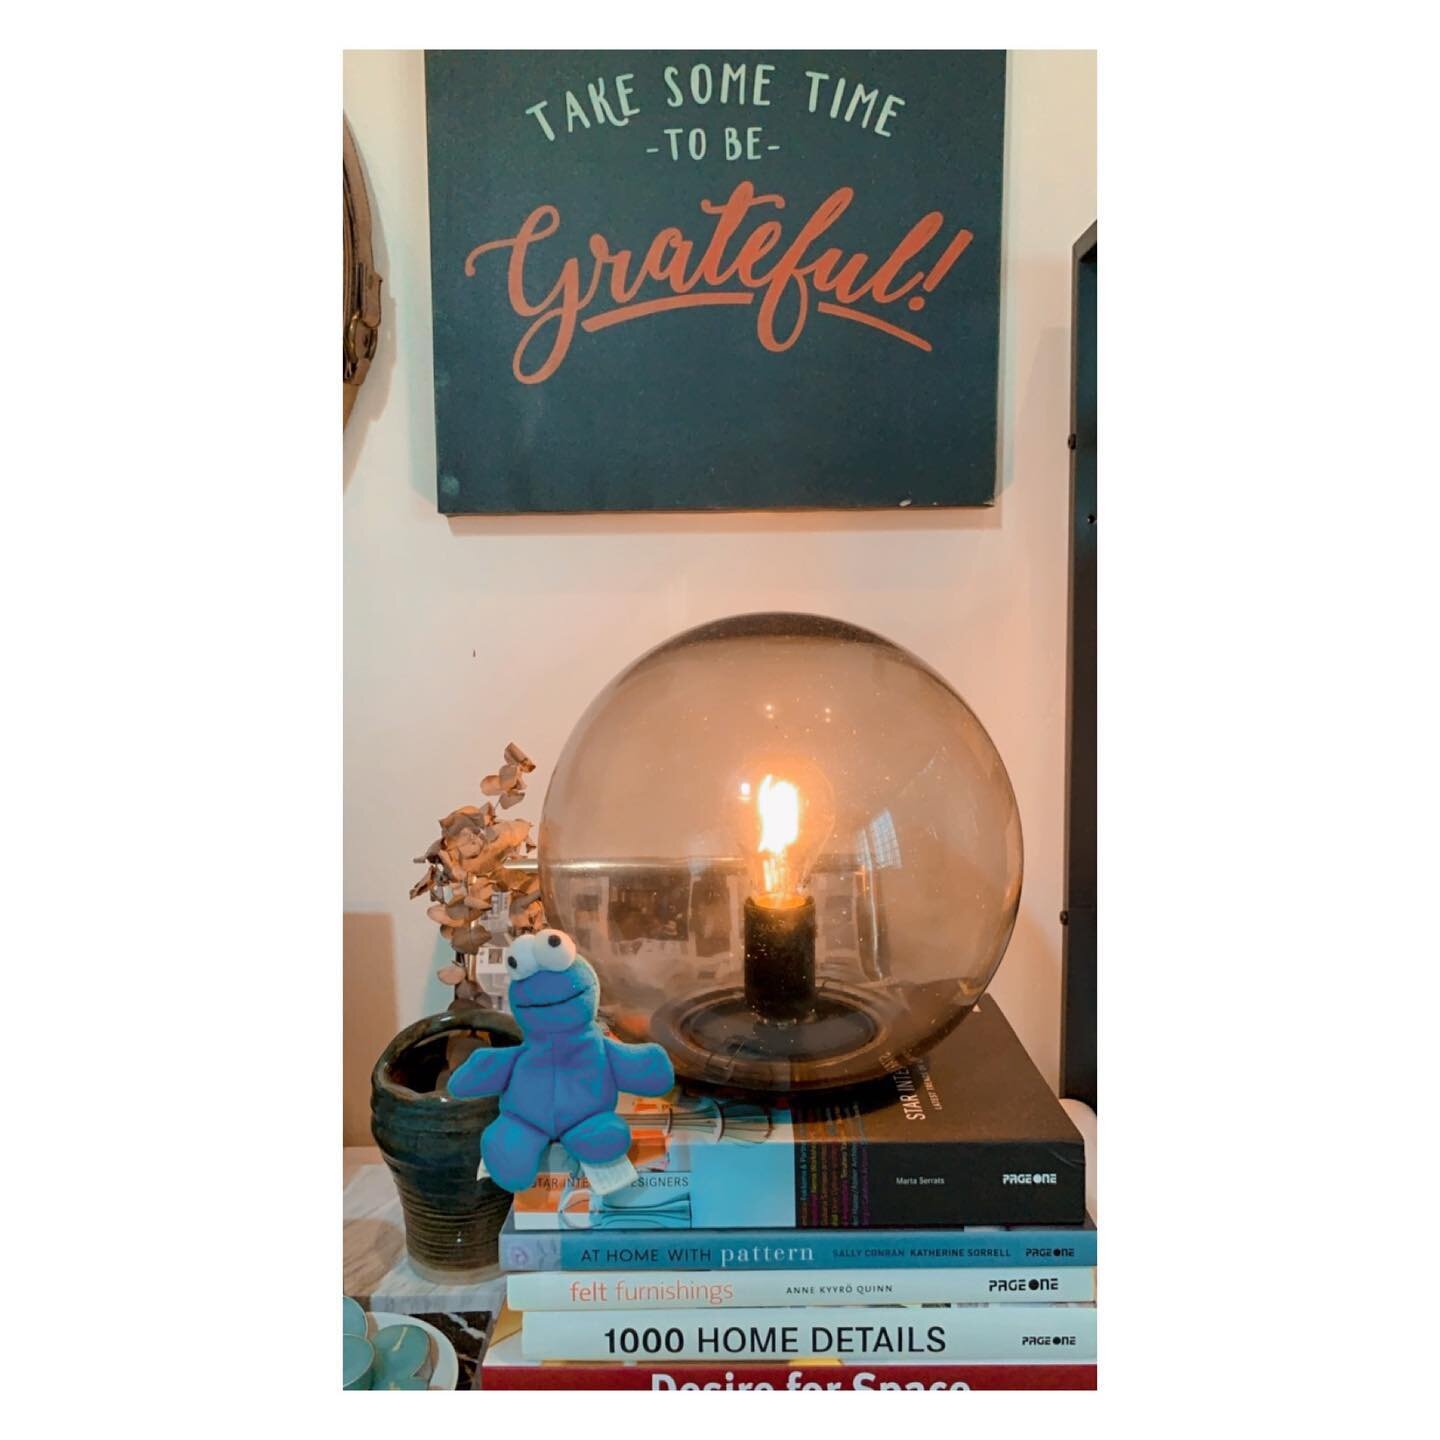 Lifestyle - Take some time to be #Grateful 💡
生活方式 - 用一些时间感激
#decor #cornerofmyhome #style #cookiemonster #ikea #ikeatablelamp #interiordesign #interiordesigning #singaporeinteriordesign&nbsp;#singaporedesign&nbsp;#singaporeinterior&nbsp;#interiorspa